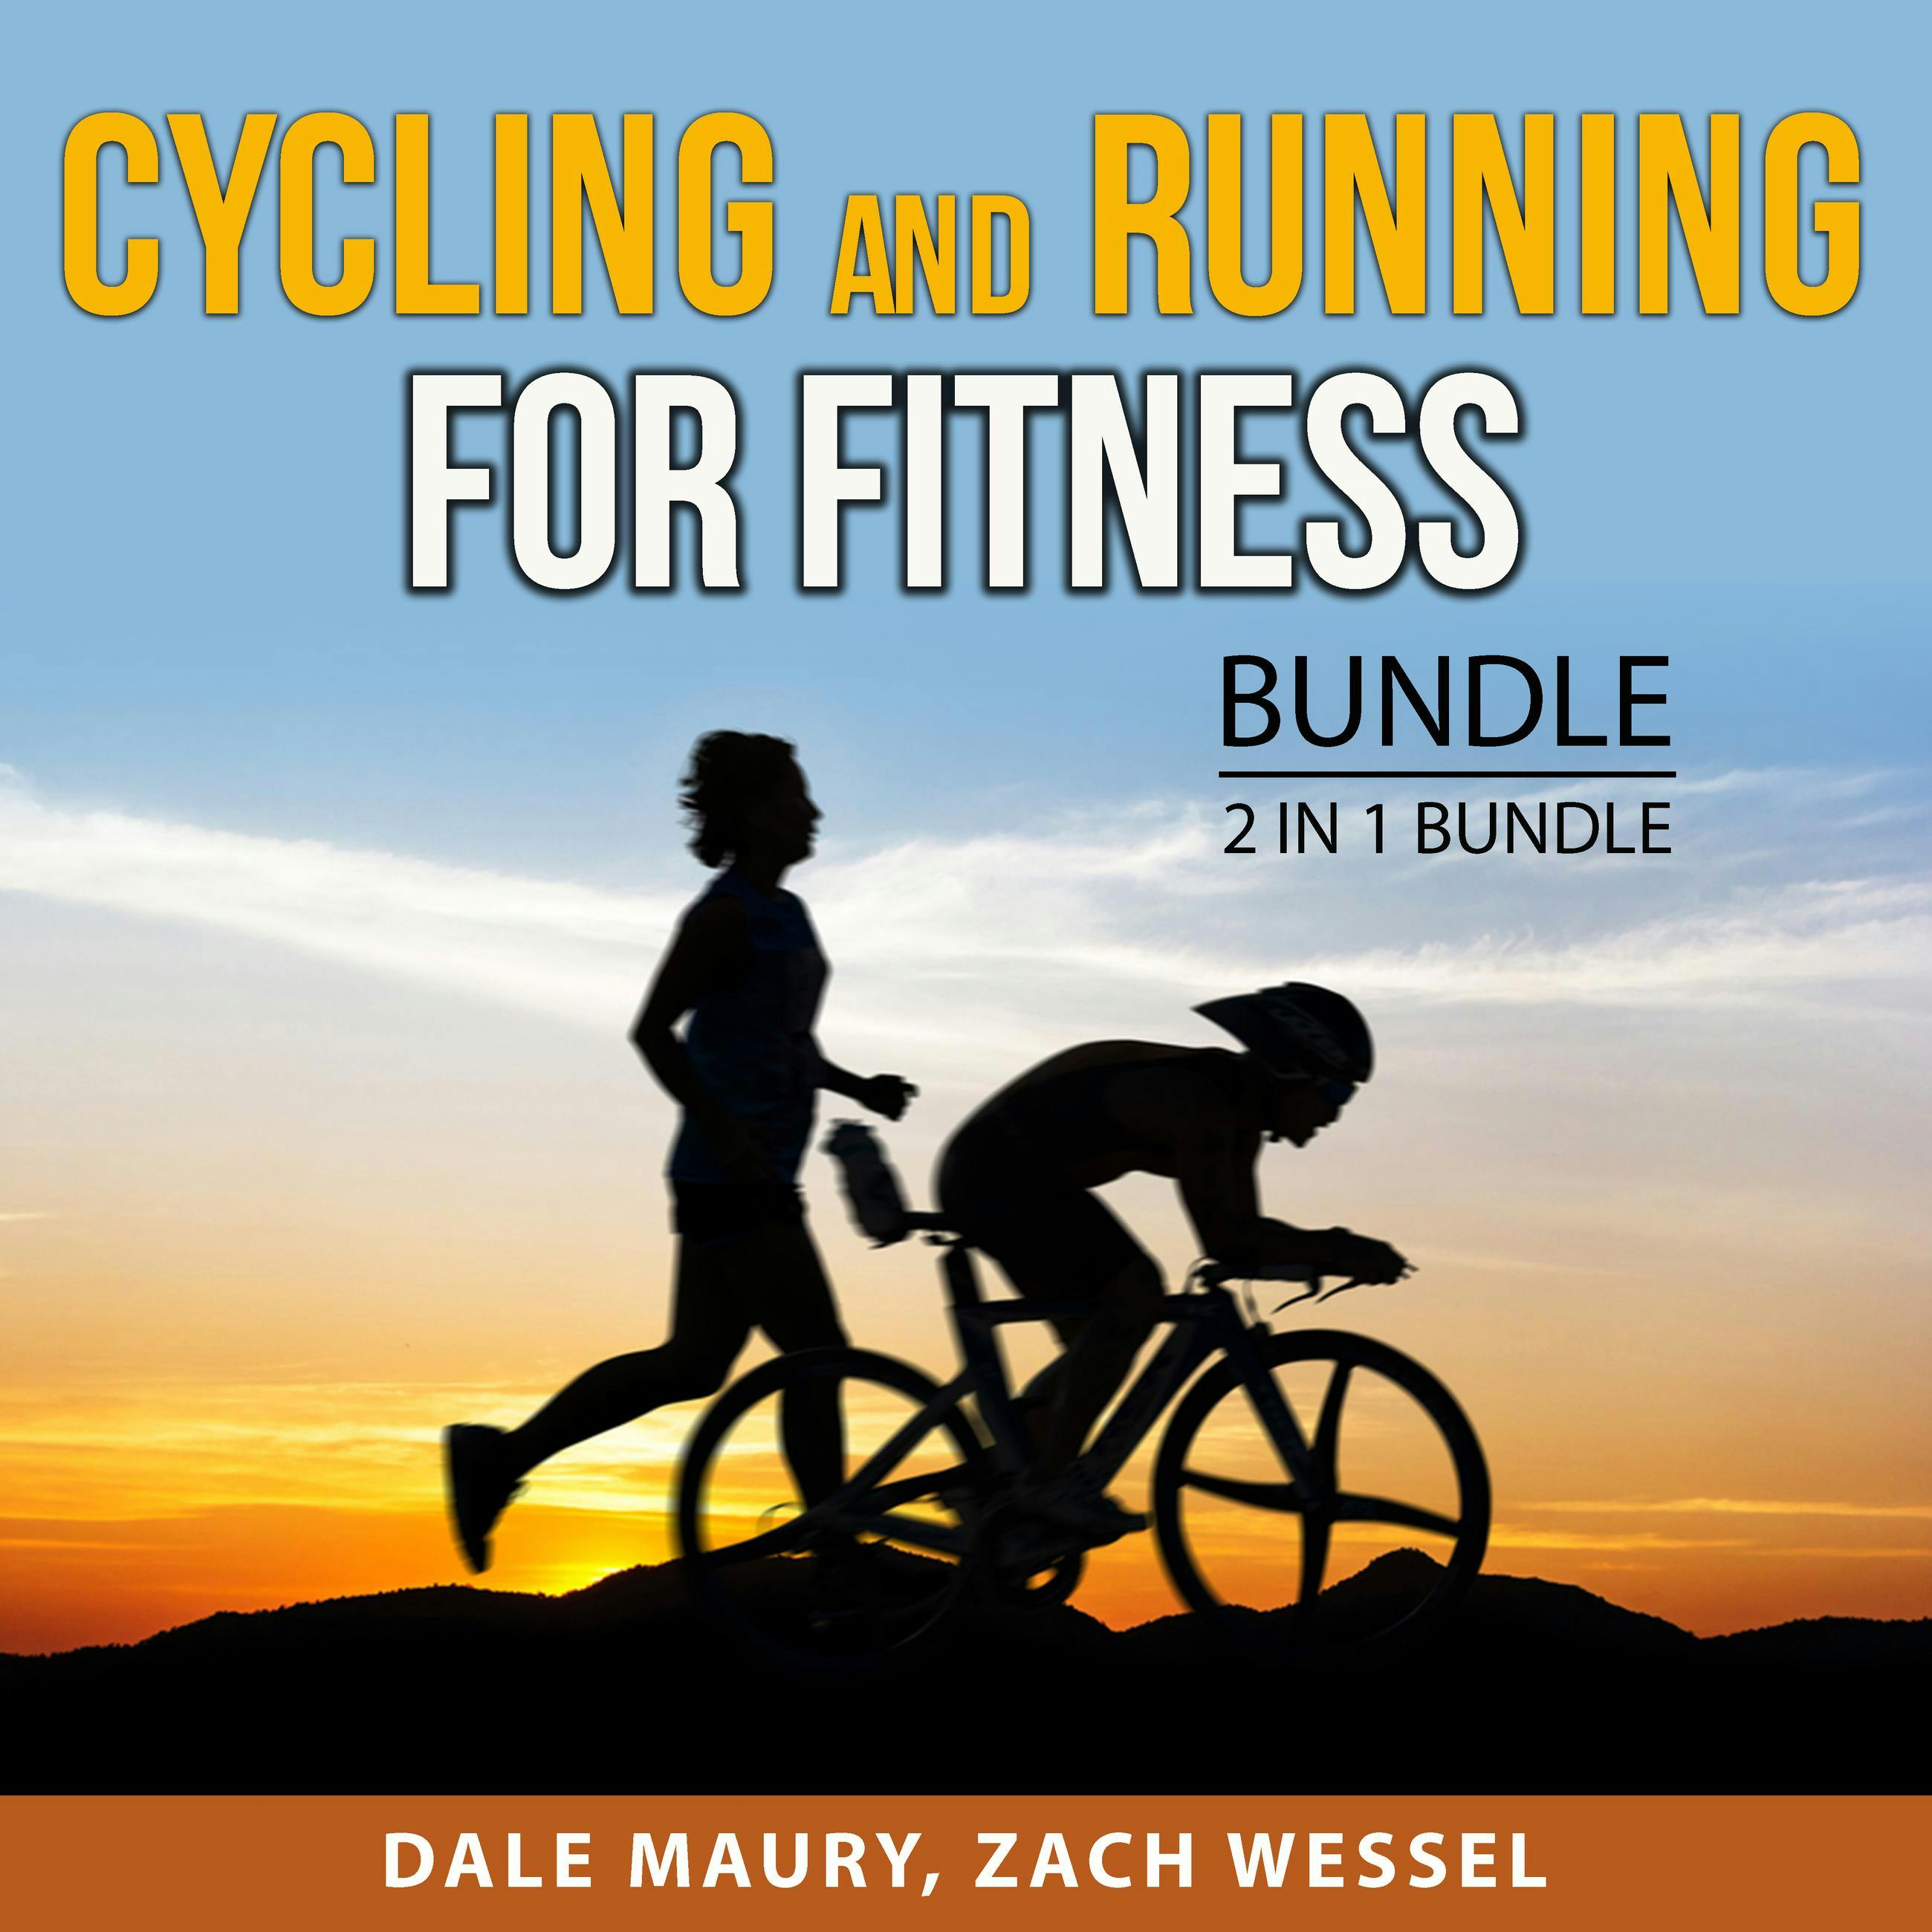 Cycling and Running for Fitness Bundle, 2 in 1 Bundle: Cycling Fun and Effective Jogging - undefined